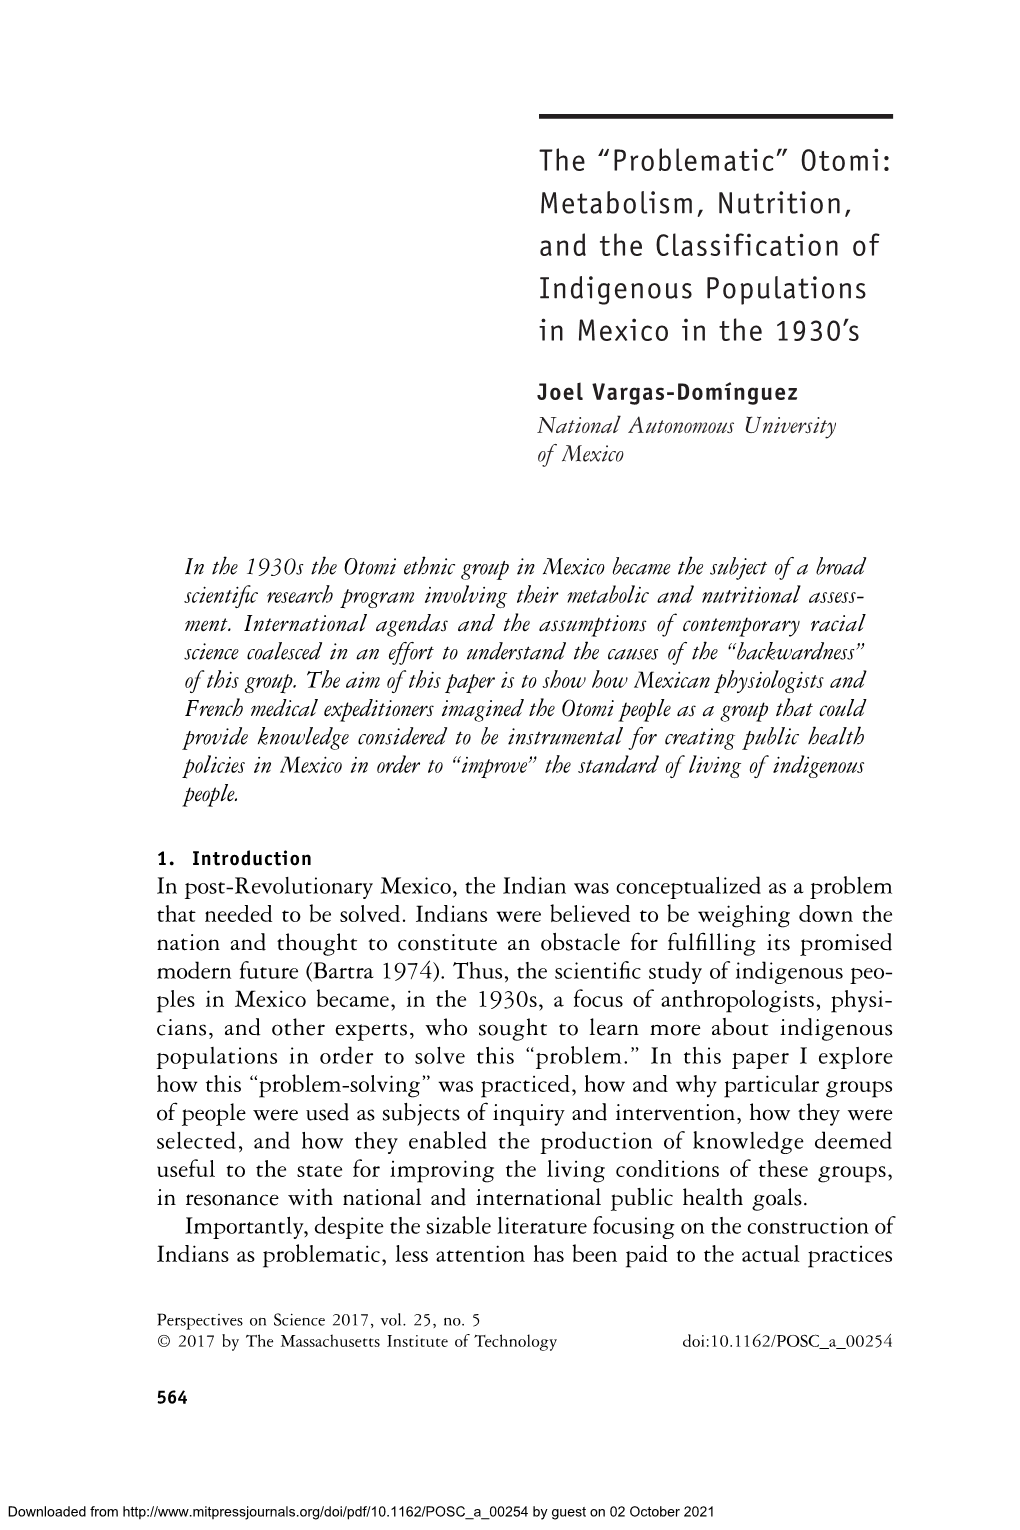 Otomi: Metabolism, Nutrition, and the Classification of Indigenous Populations in Mexico in the 1930’S